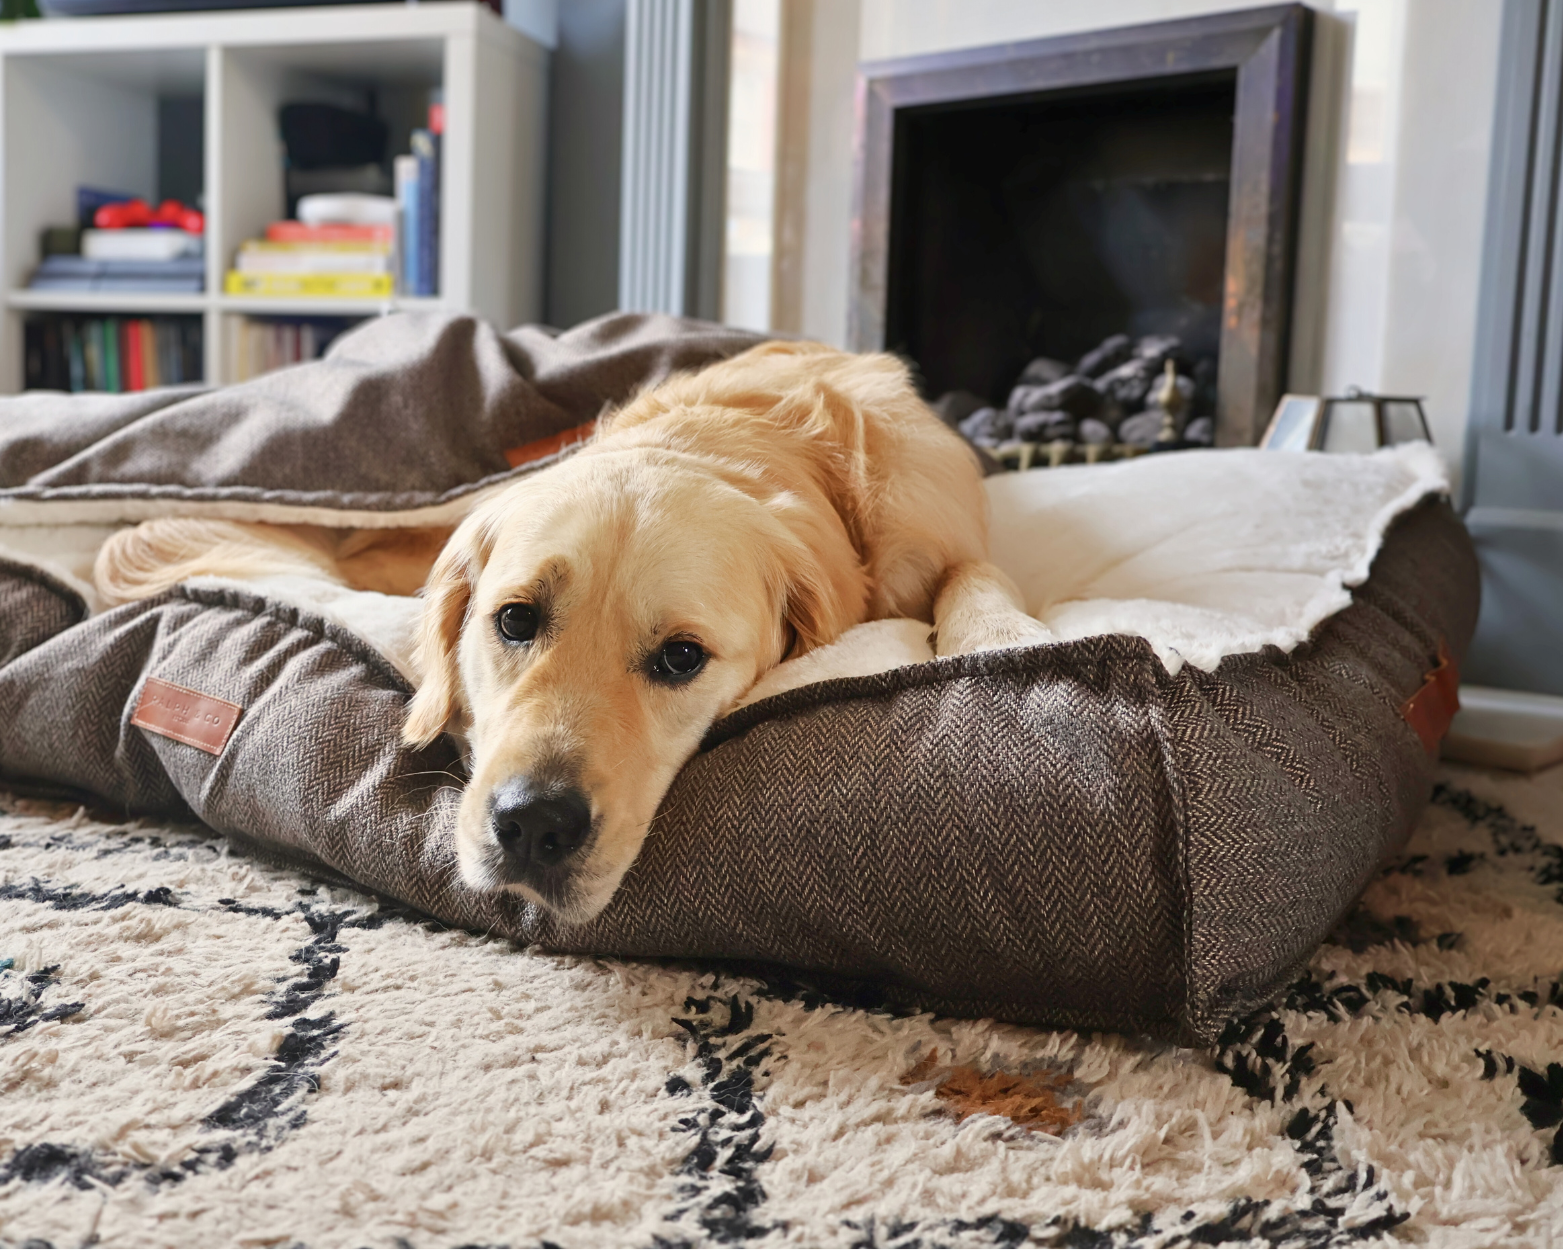 A golden lab snuggles into their Lincoln pillow bed with matching Lincoln blanket